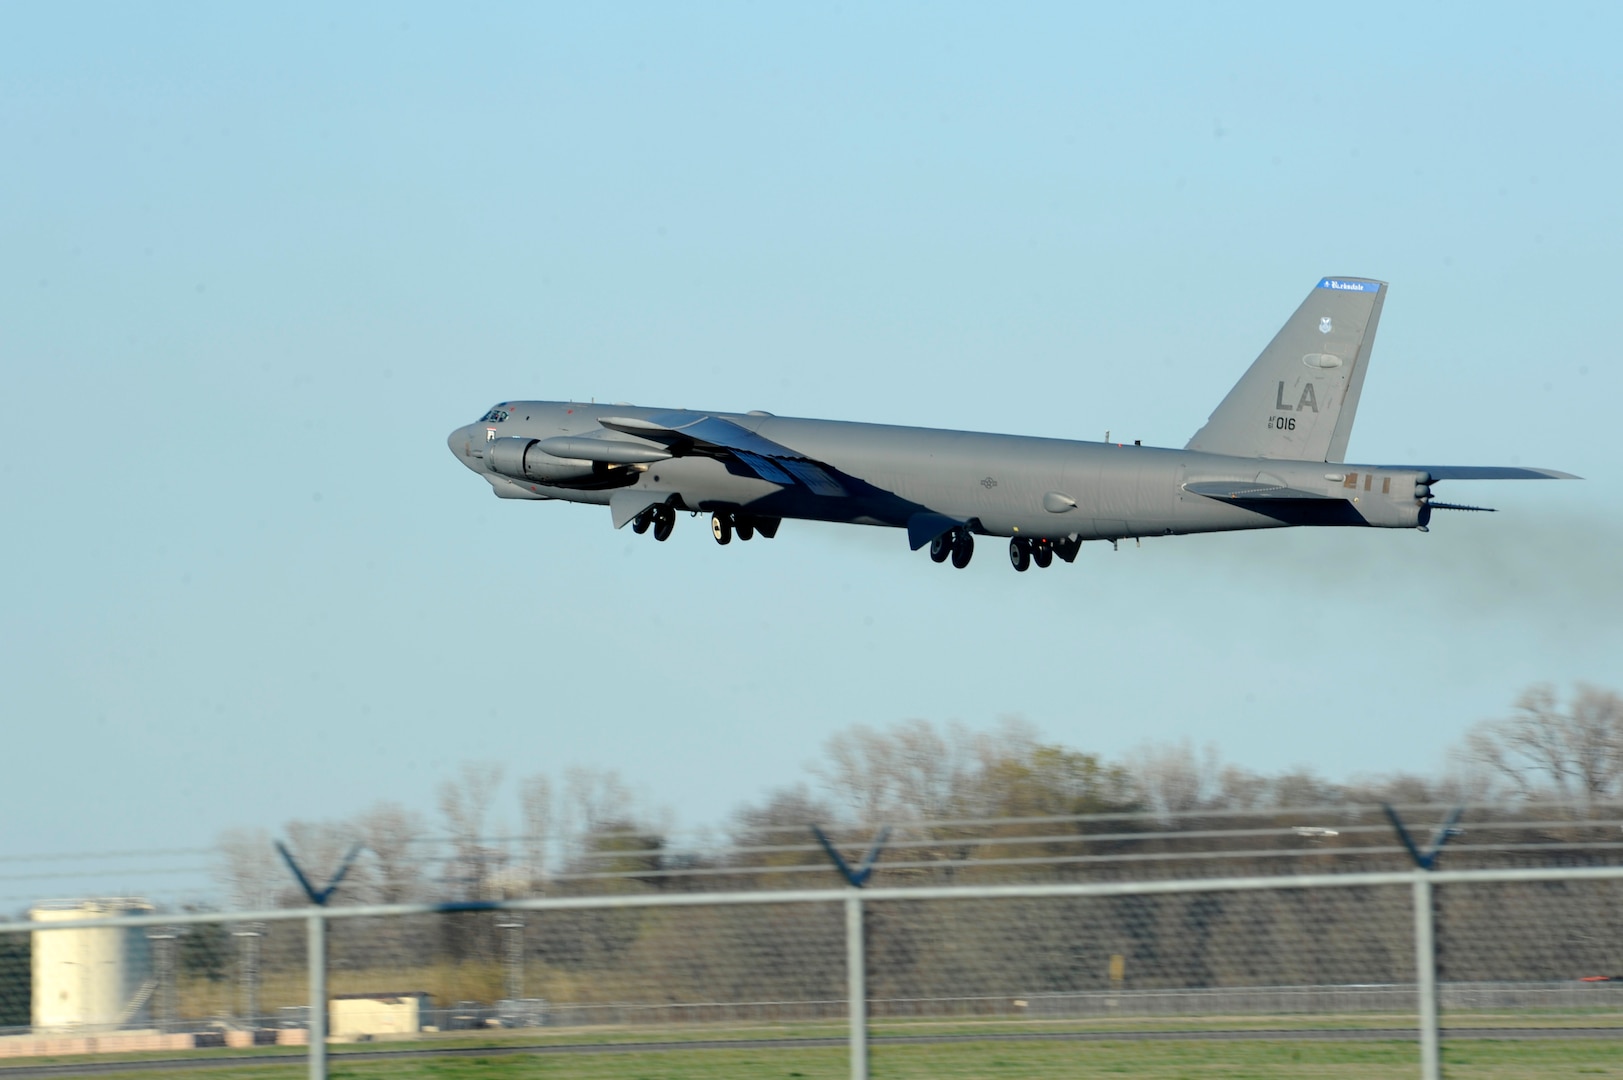 A B-52 Stratofortress takes off from Barksdale Air Force Base, La., Feb. 26, 2016, headed to Moron Air Base, Spain. During the short-term deployment, three of the multi-role heavy bombers and more than 200 Airmen assigned to the 2nd Bomb Wing will integrate and train with U.S. European Command components and regional allies and partners by participating in the Norwegian exercise Cold Response. U.S. Strategic Command (USSTRATCOM) and Air Force Global Strike Command routinely and visibly demonstrate the U.S. commitment to our allies and partners, as well as global security, through joint and international training exercises such as these. One of nine DoD unified combatant commands, USSTRATCOM has global strategic missions, assigned through the Unified Command Plan, which include strategic deterrence; space operations; cyberspace operations; joint electronic warfare; global strike; missile defense; intelligence, surveillance and reconnaissance; combating weapons of mass destruction; and analysis and targeting. (U.S. Air Force photo by Staff Sgt. Joseph Pagan)